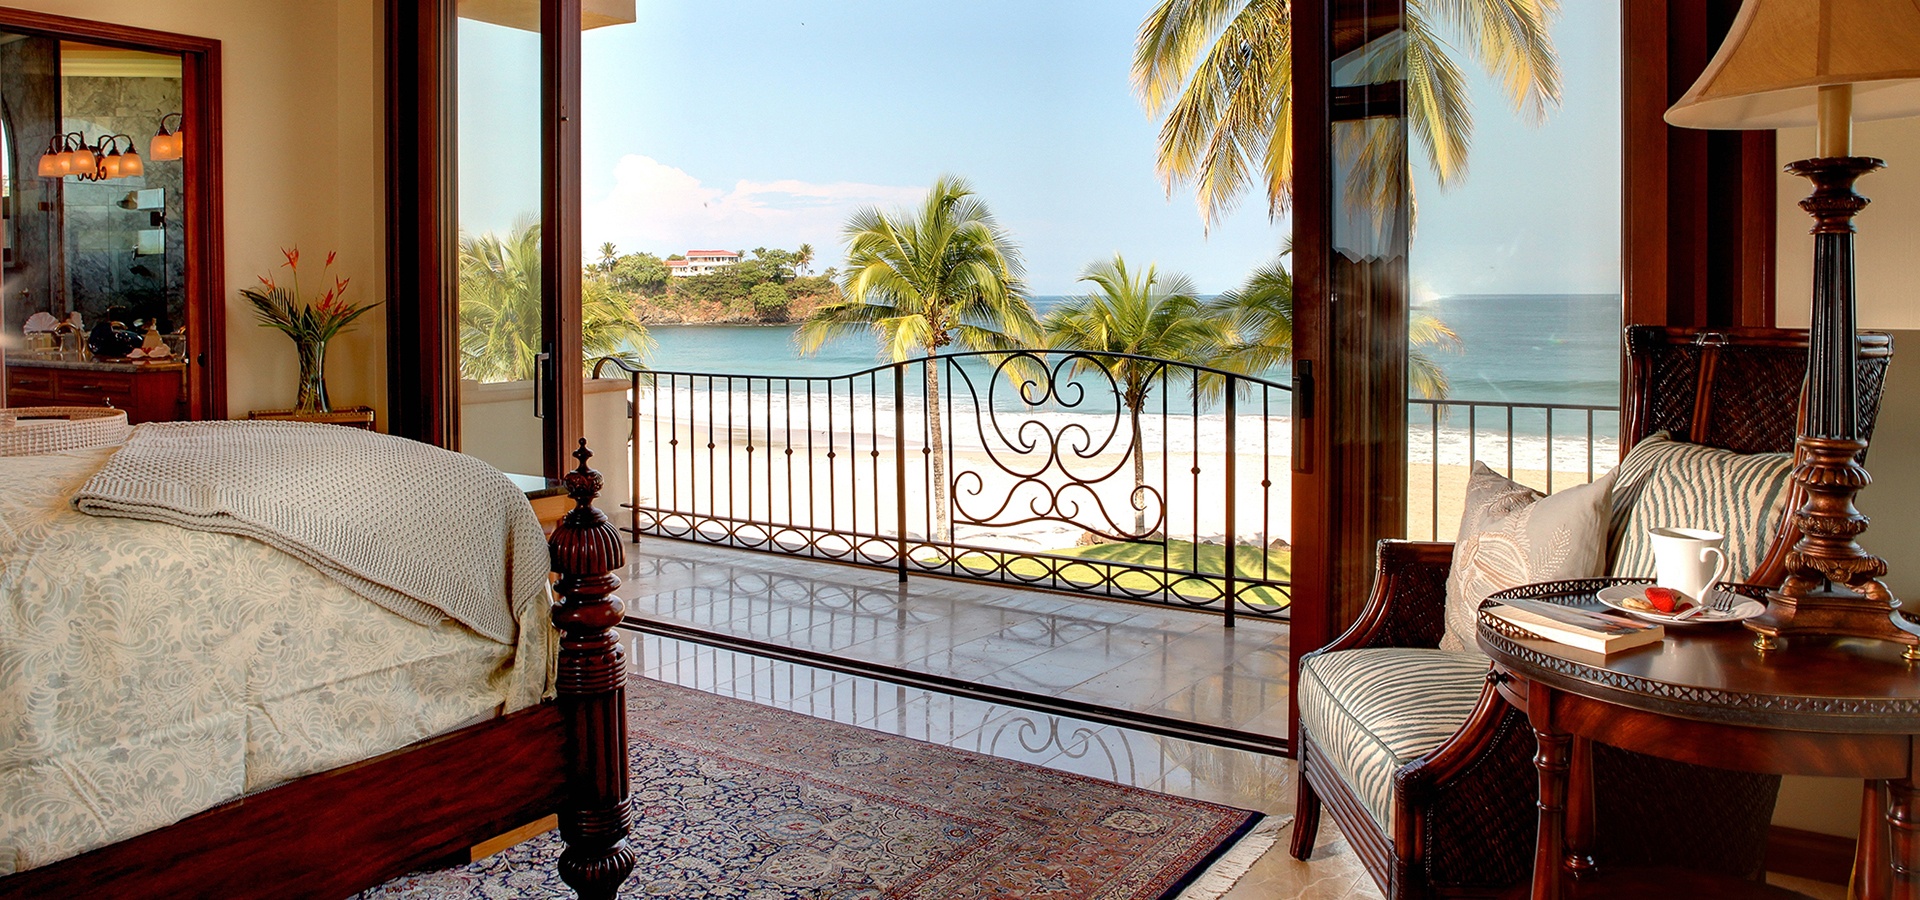 Palms Villas Costa Rica panoramic ocean views with magnificent sunsets, 2 Bedroom Villa